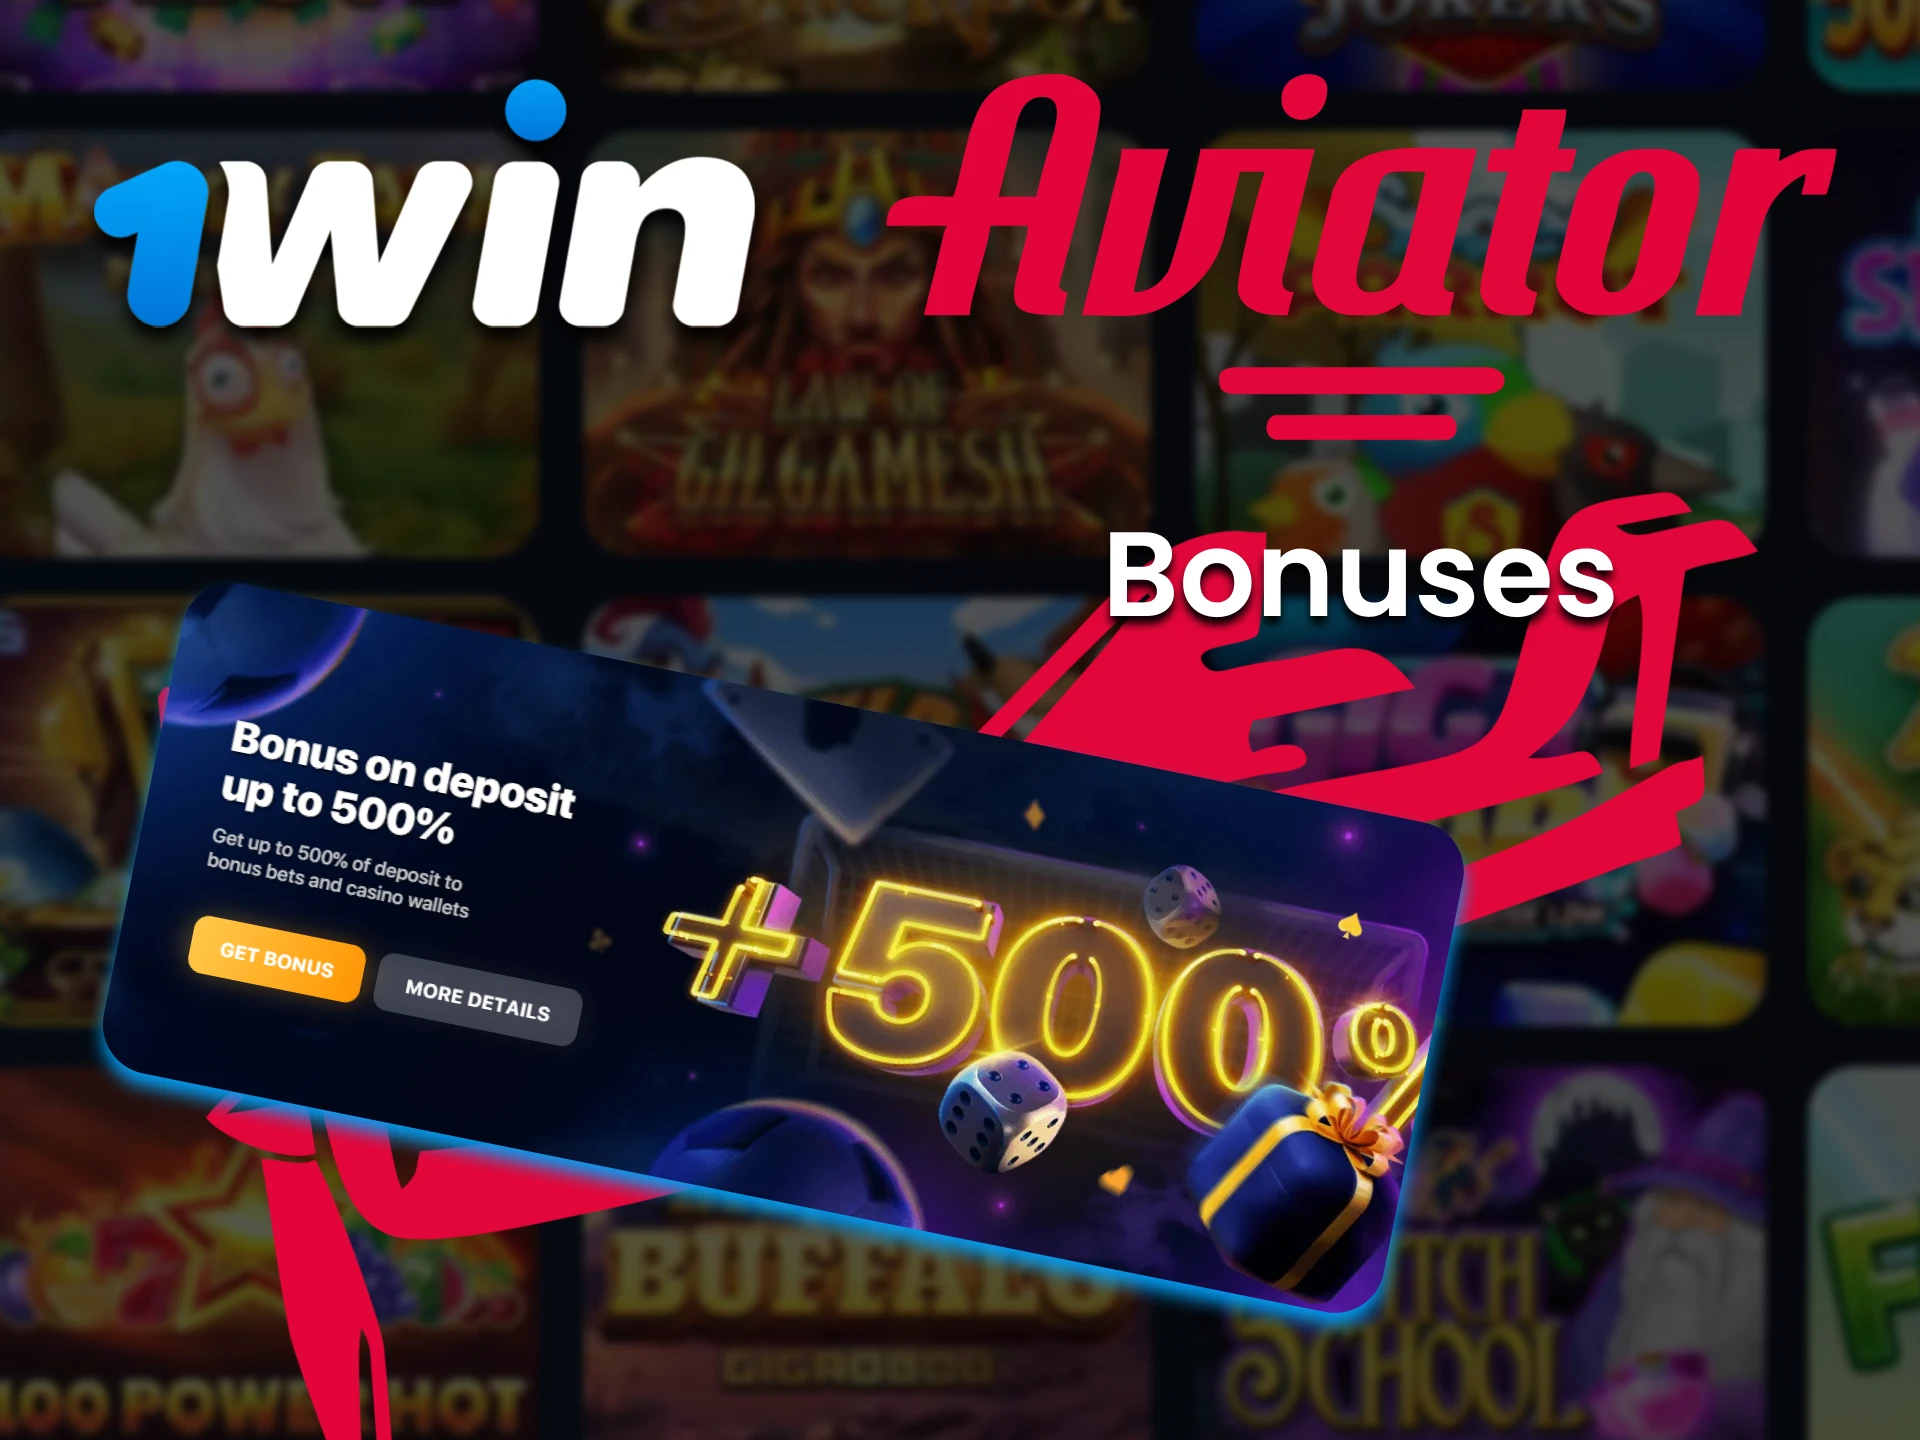 Use promo code for 1Win Aviator and increase your winnings by 500%.